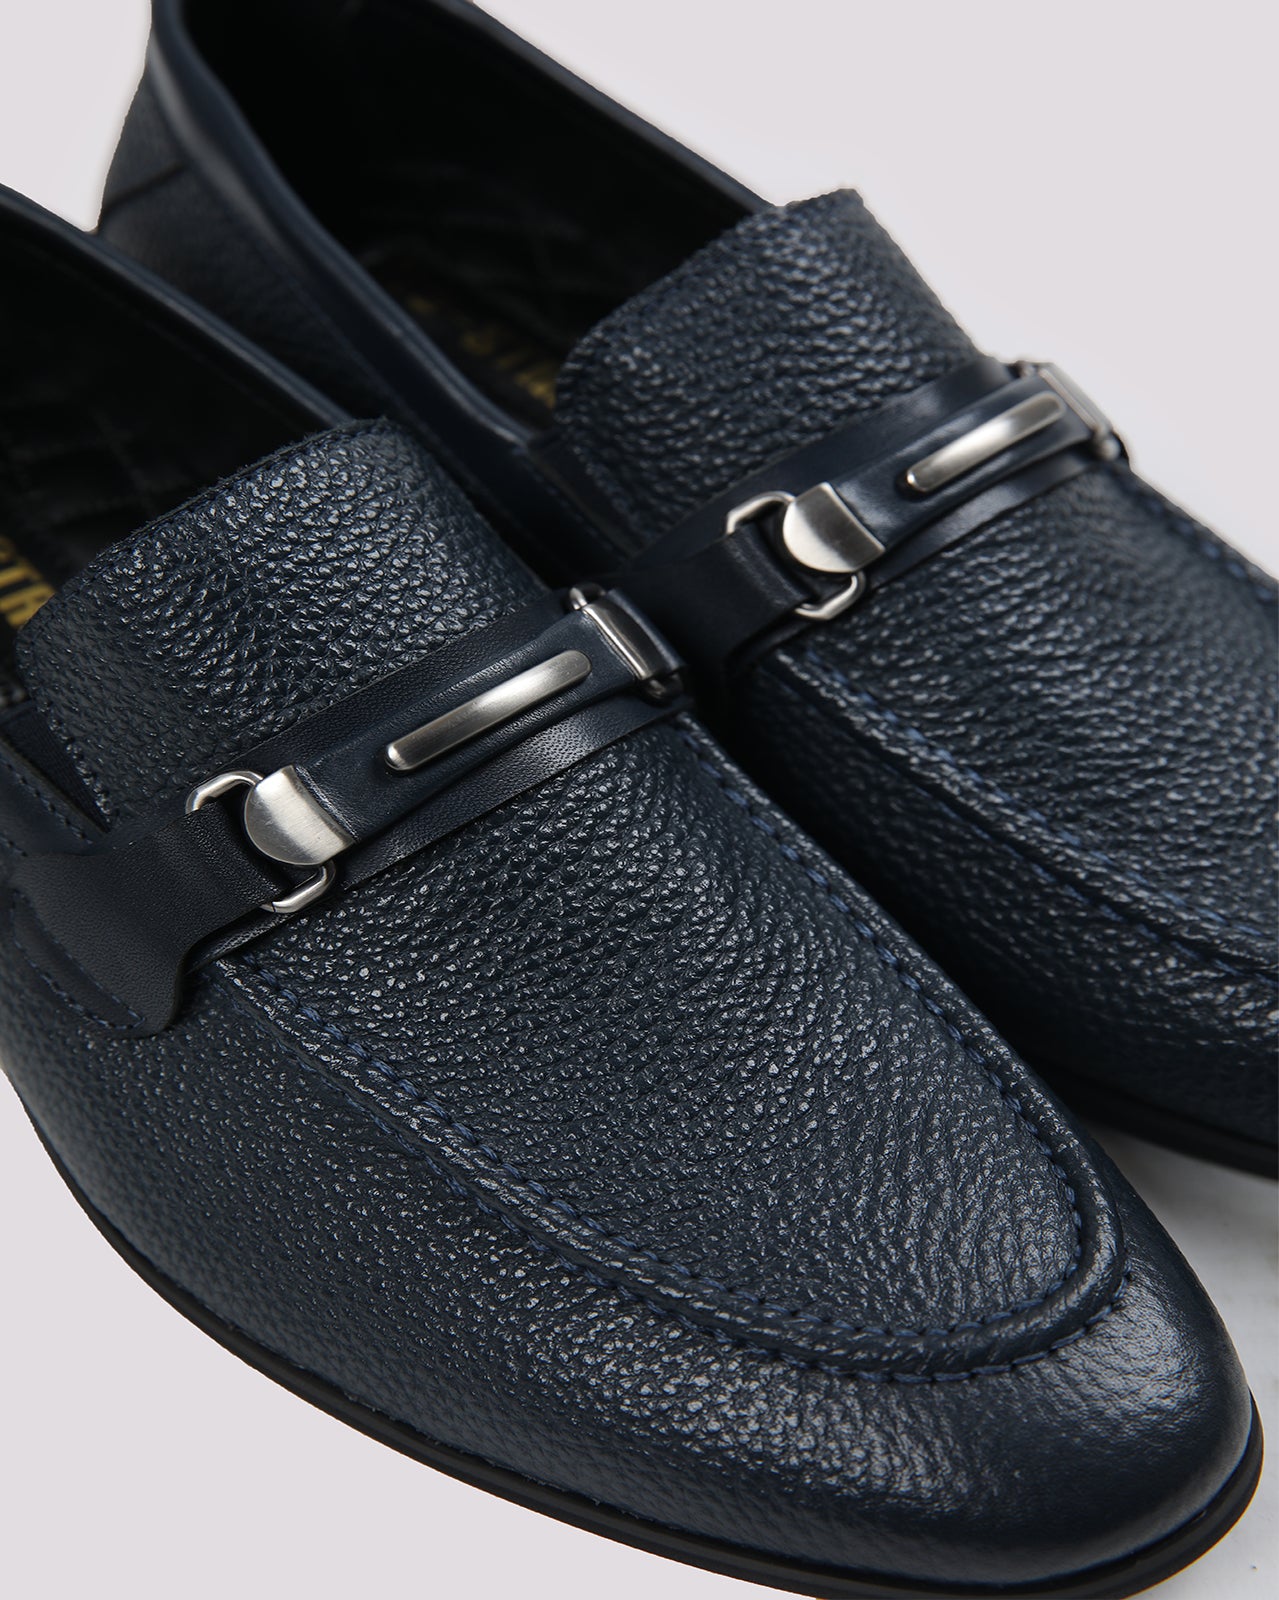 Buckle Detail Loafer Shoes